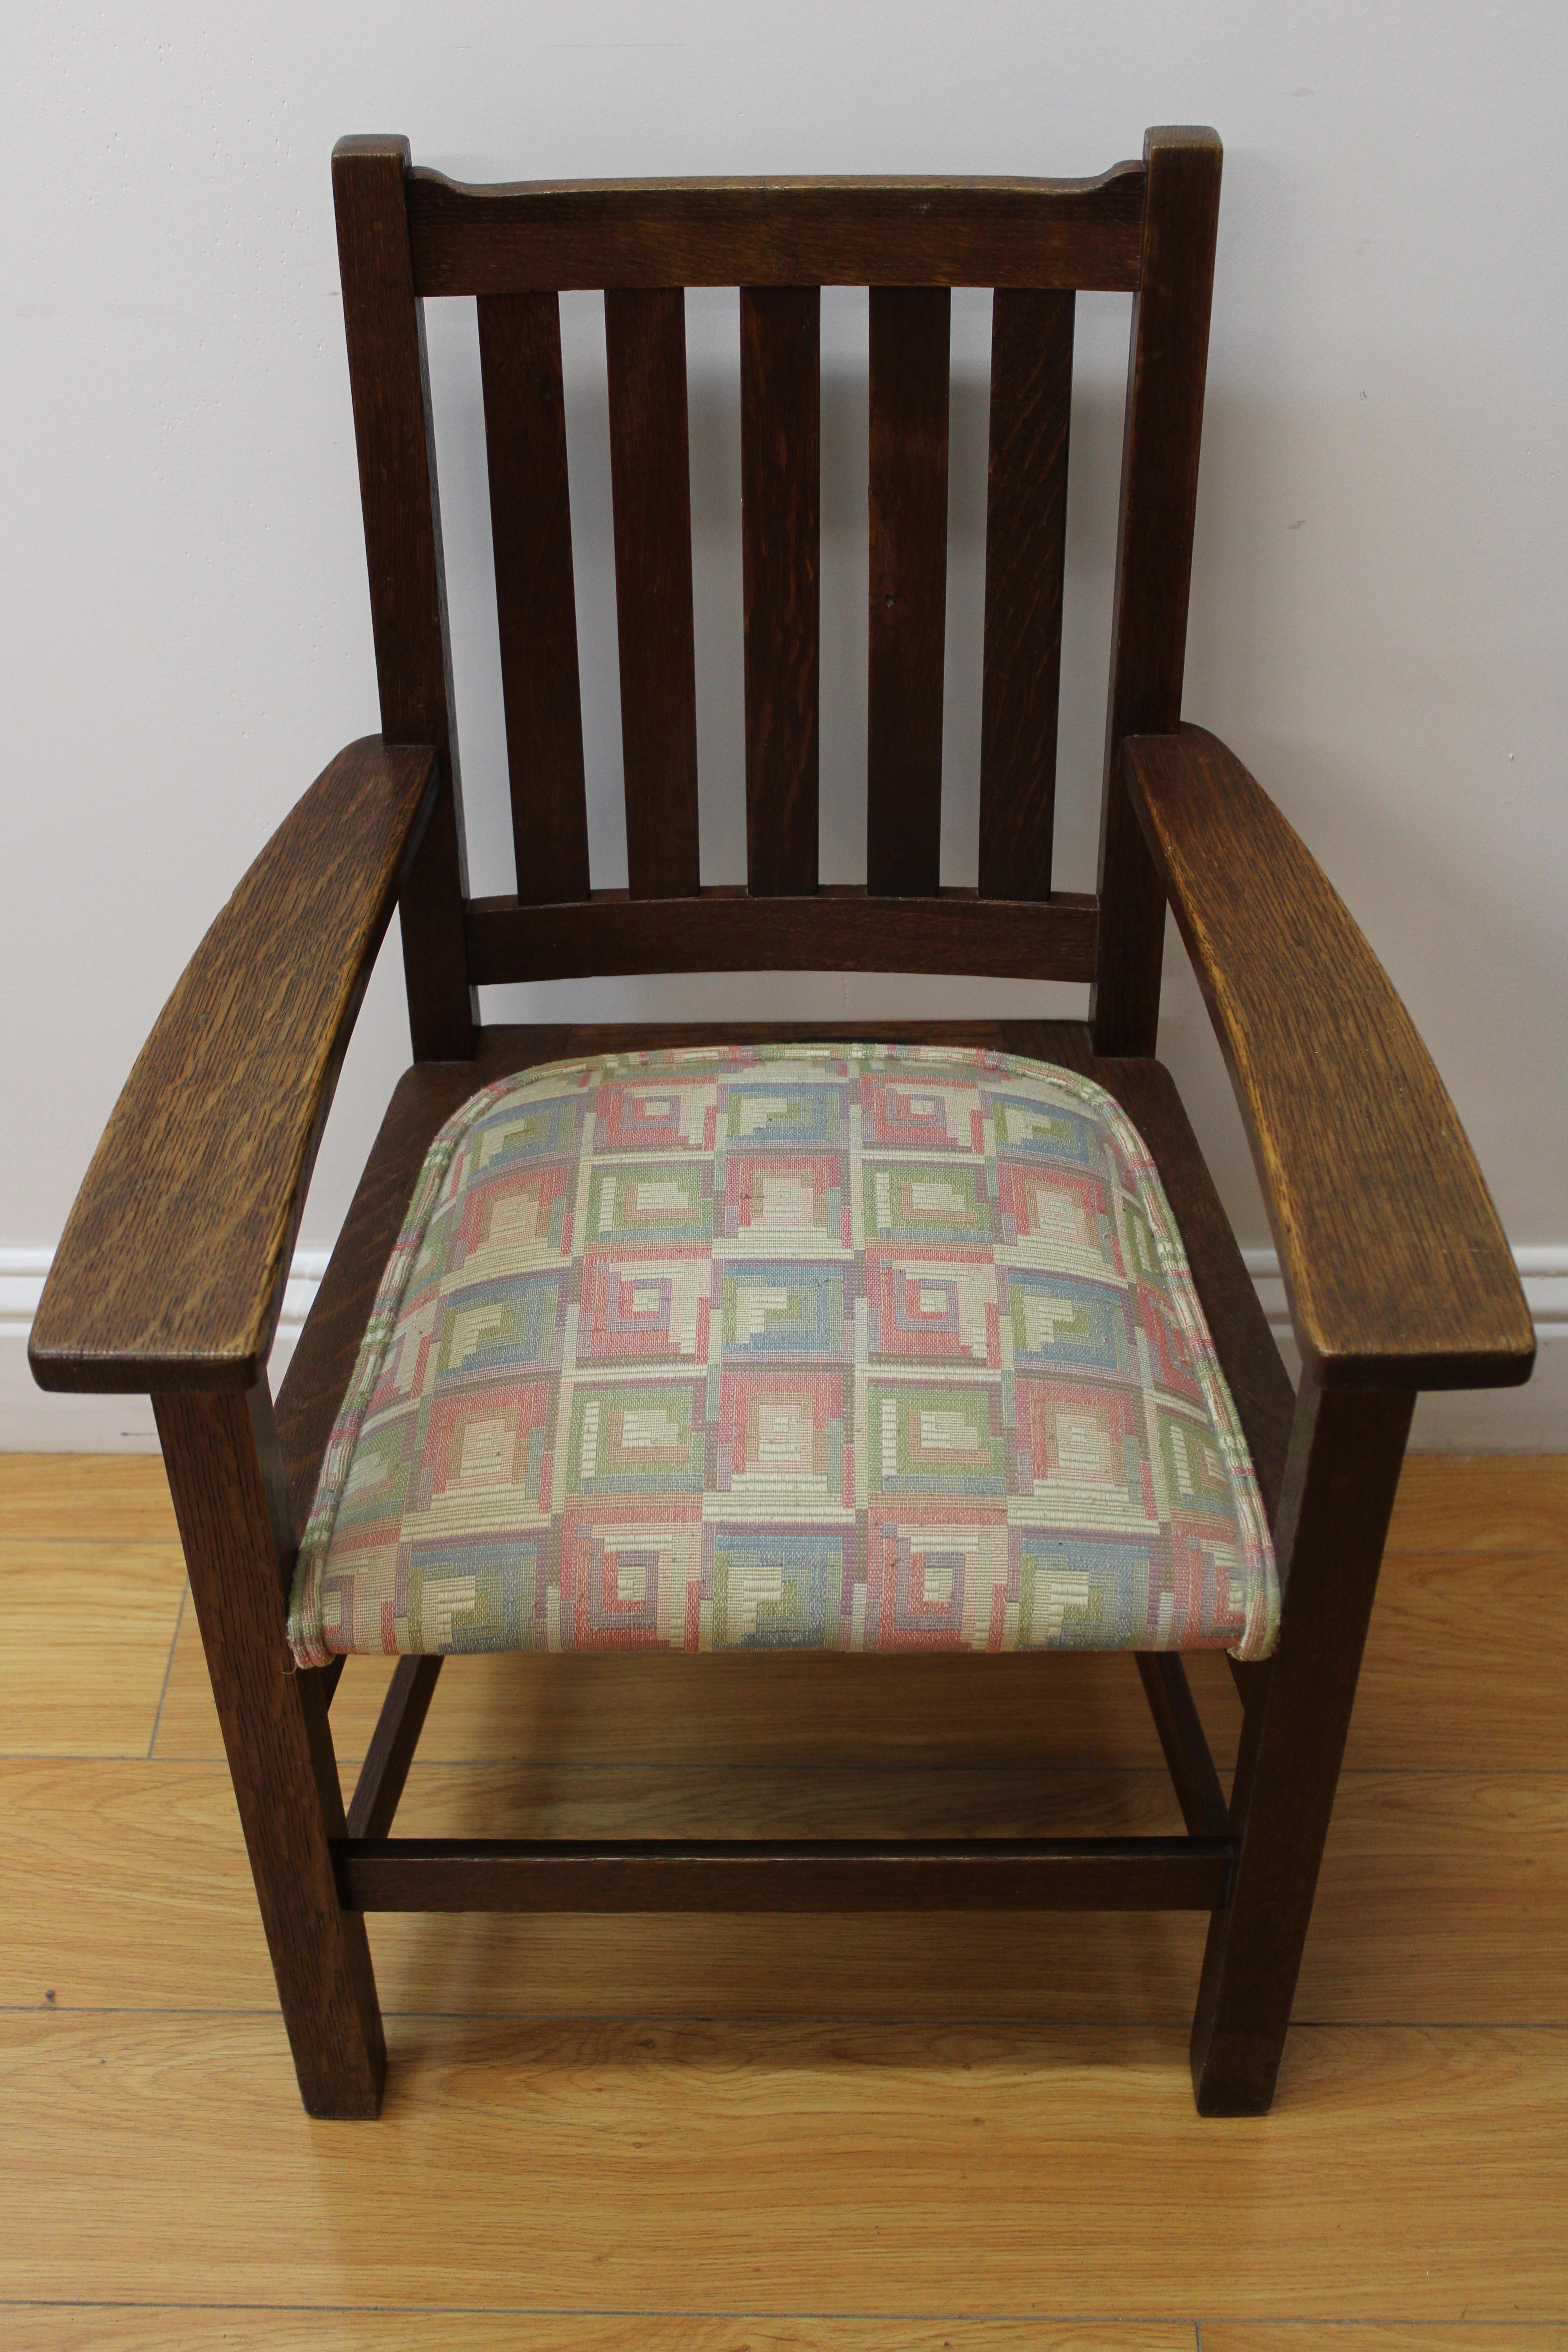 C. 20th Century.

Adorable authentic Stickley Brothers quaint child's chair, made from quartersawn oak & has fabric upholstered seat.